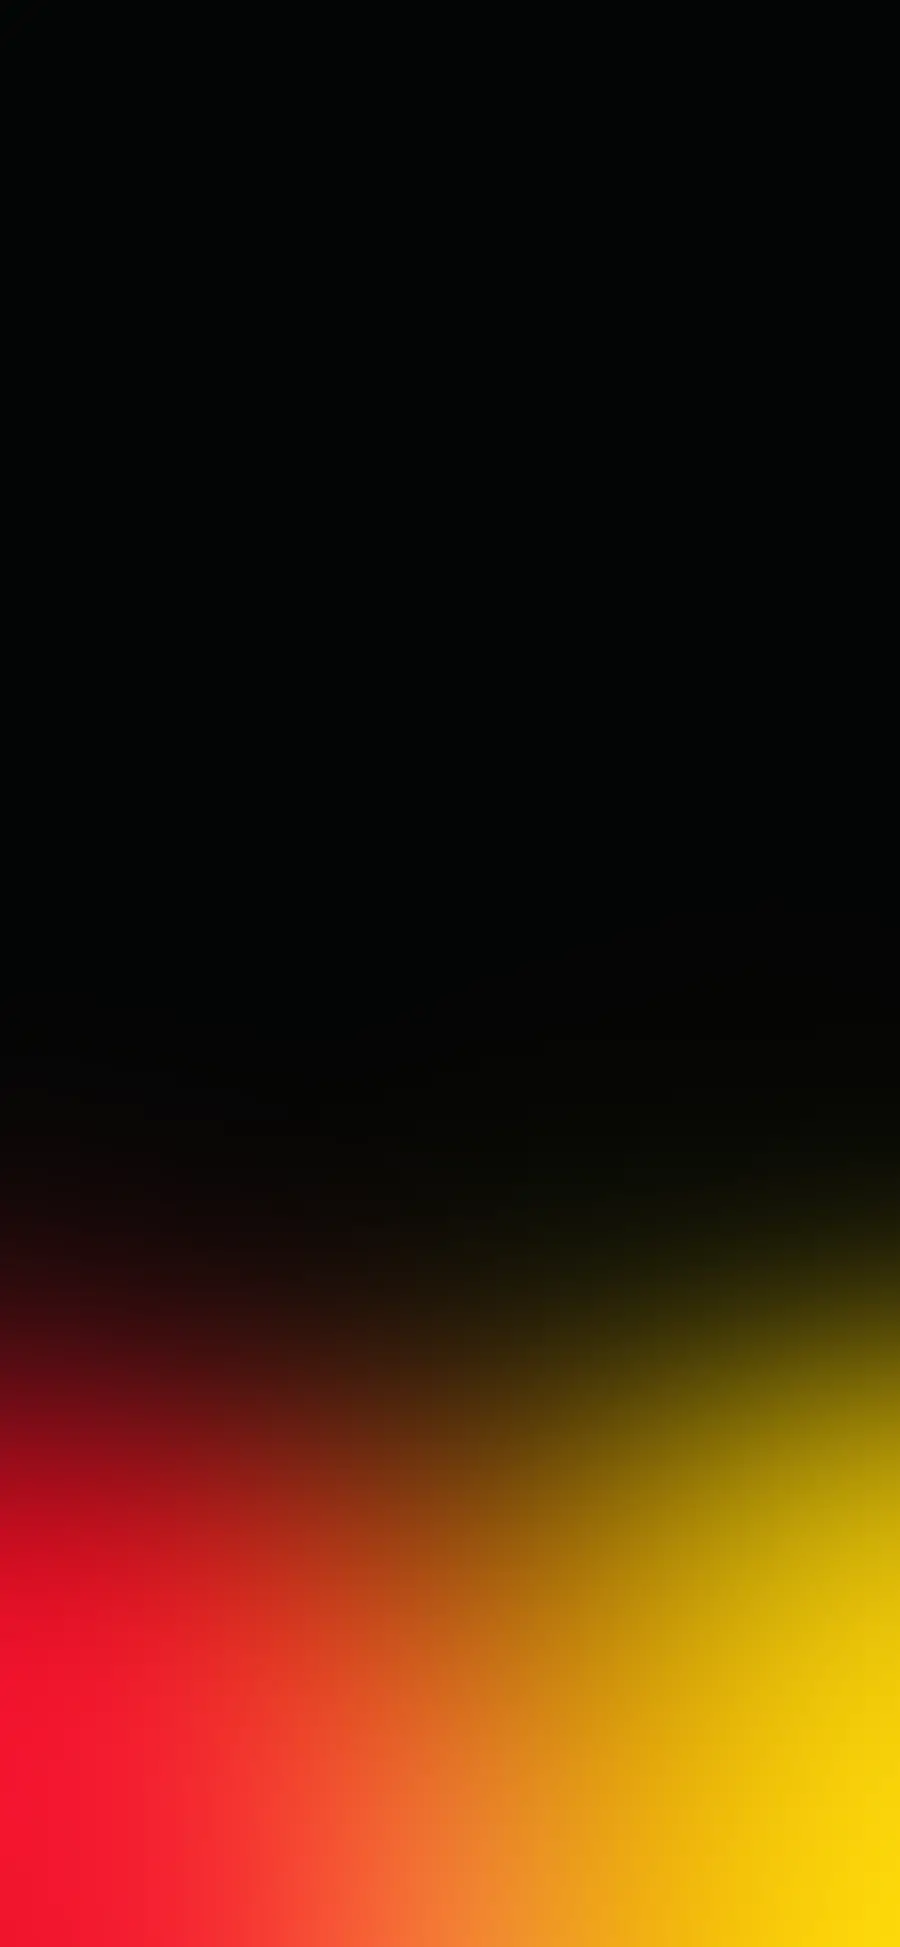 Best Gradient Background With Dynamic Shapes